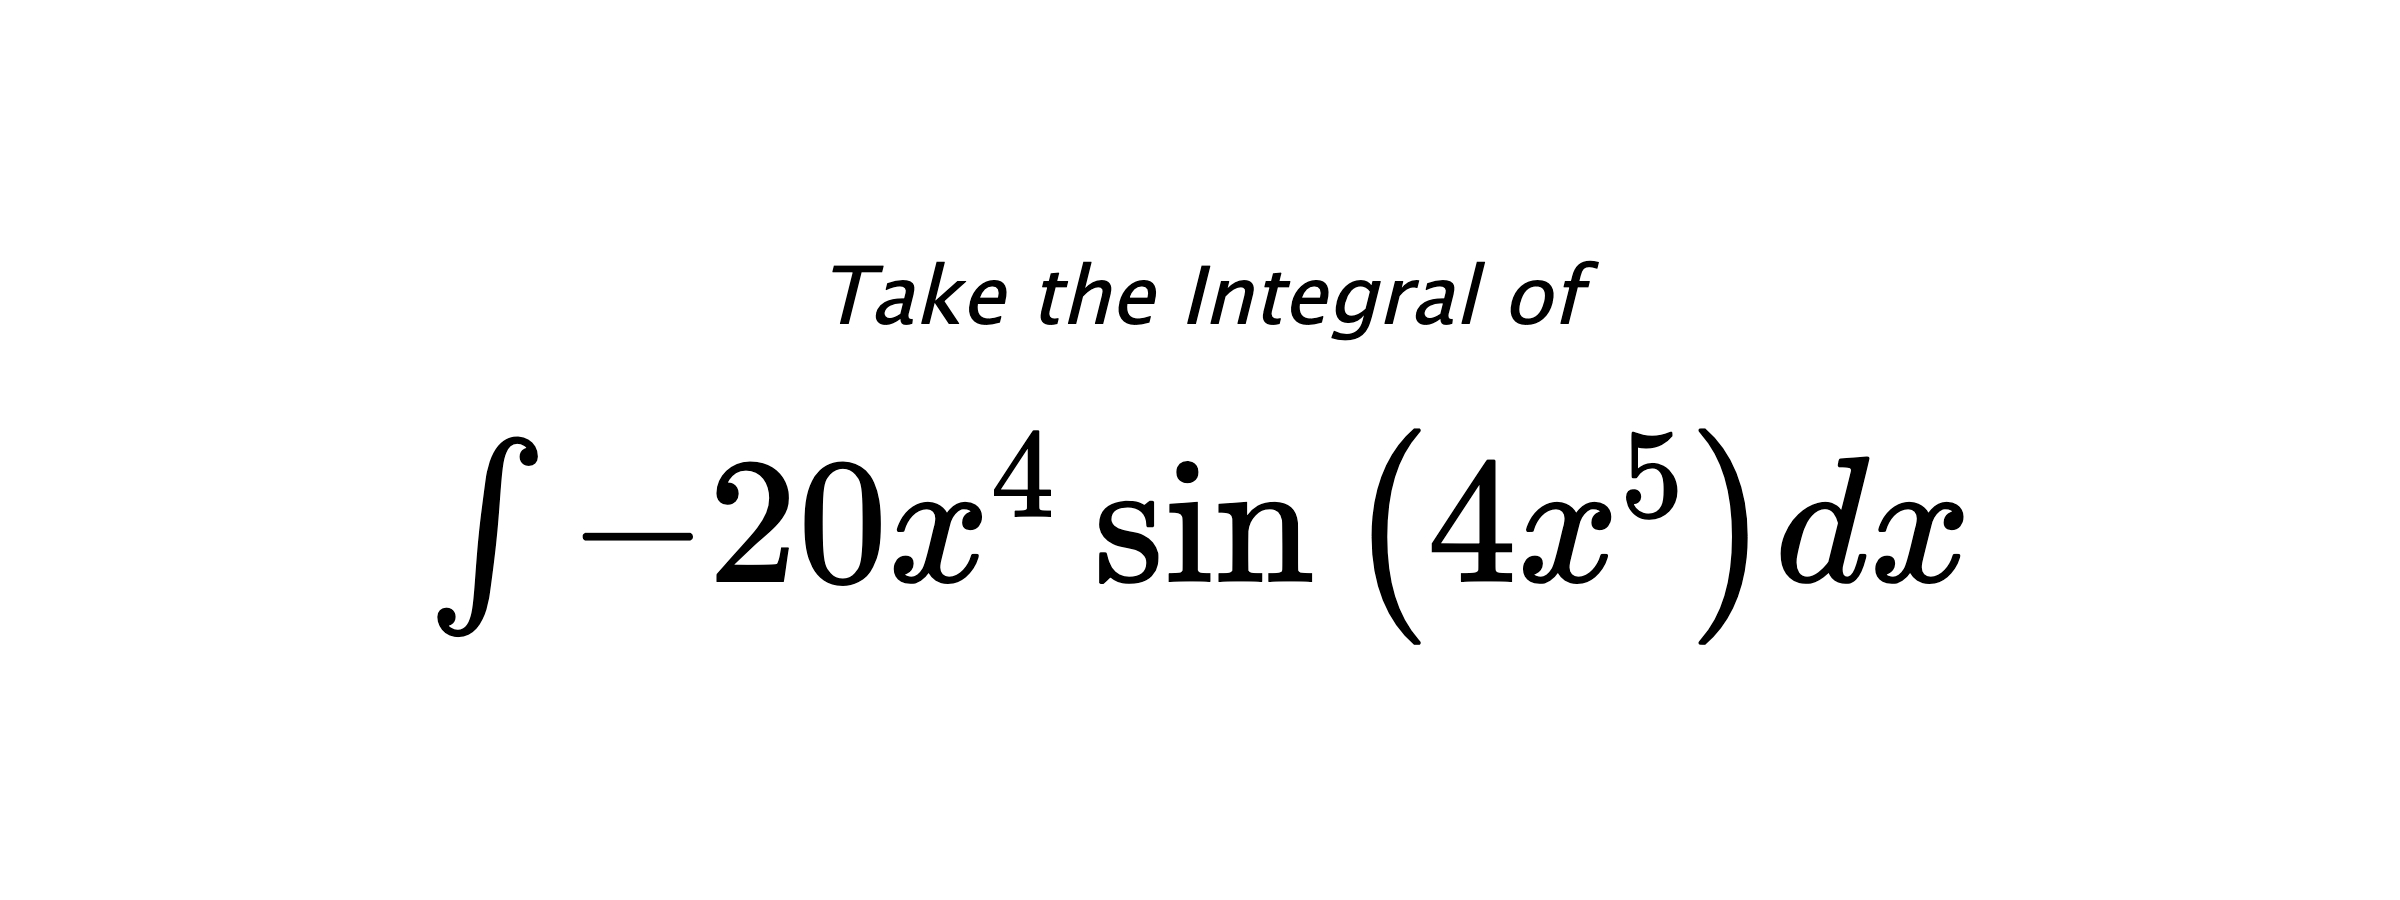 Take the Integral of $ \int - 20 x^{4} \sin{\left(4 x^{5} \right)} dx $